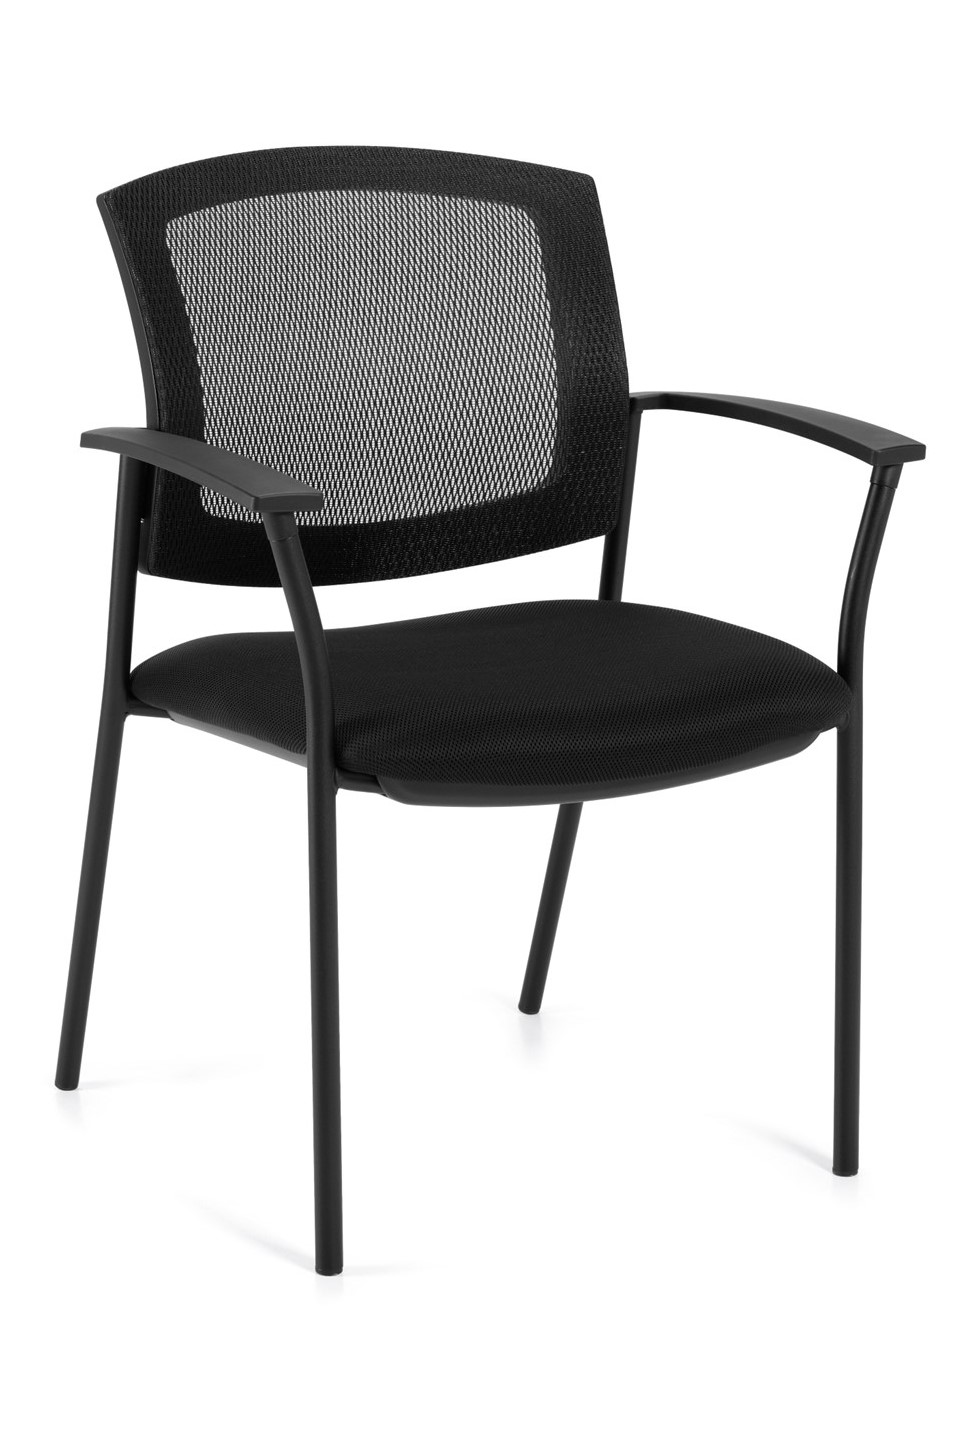 Black mesh back guest chair with black round tubular steel base, fabric seat, and curved urethane-skinned arm caps